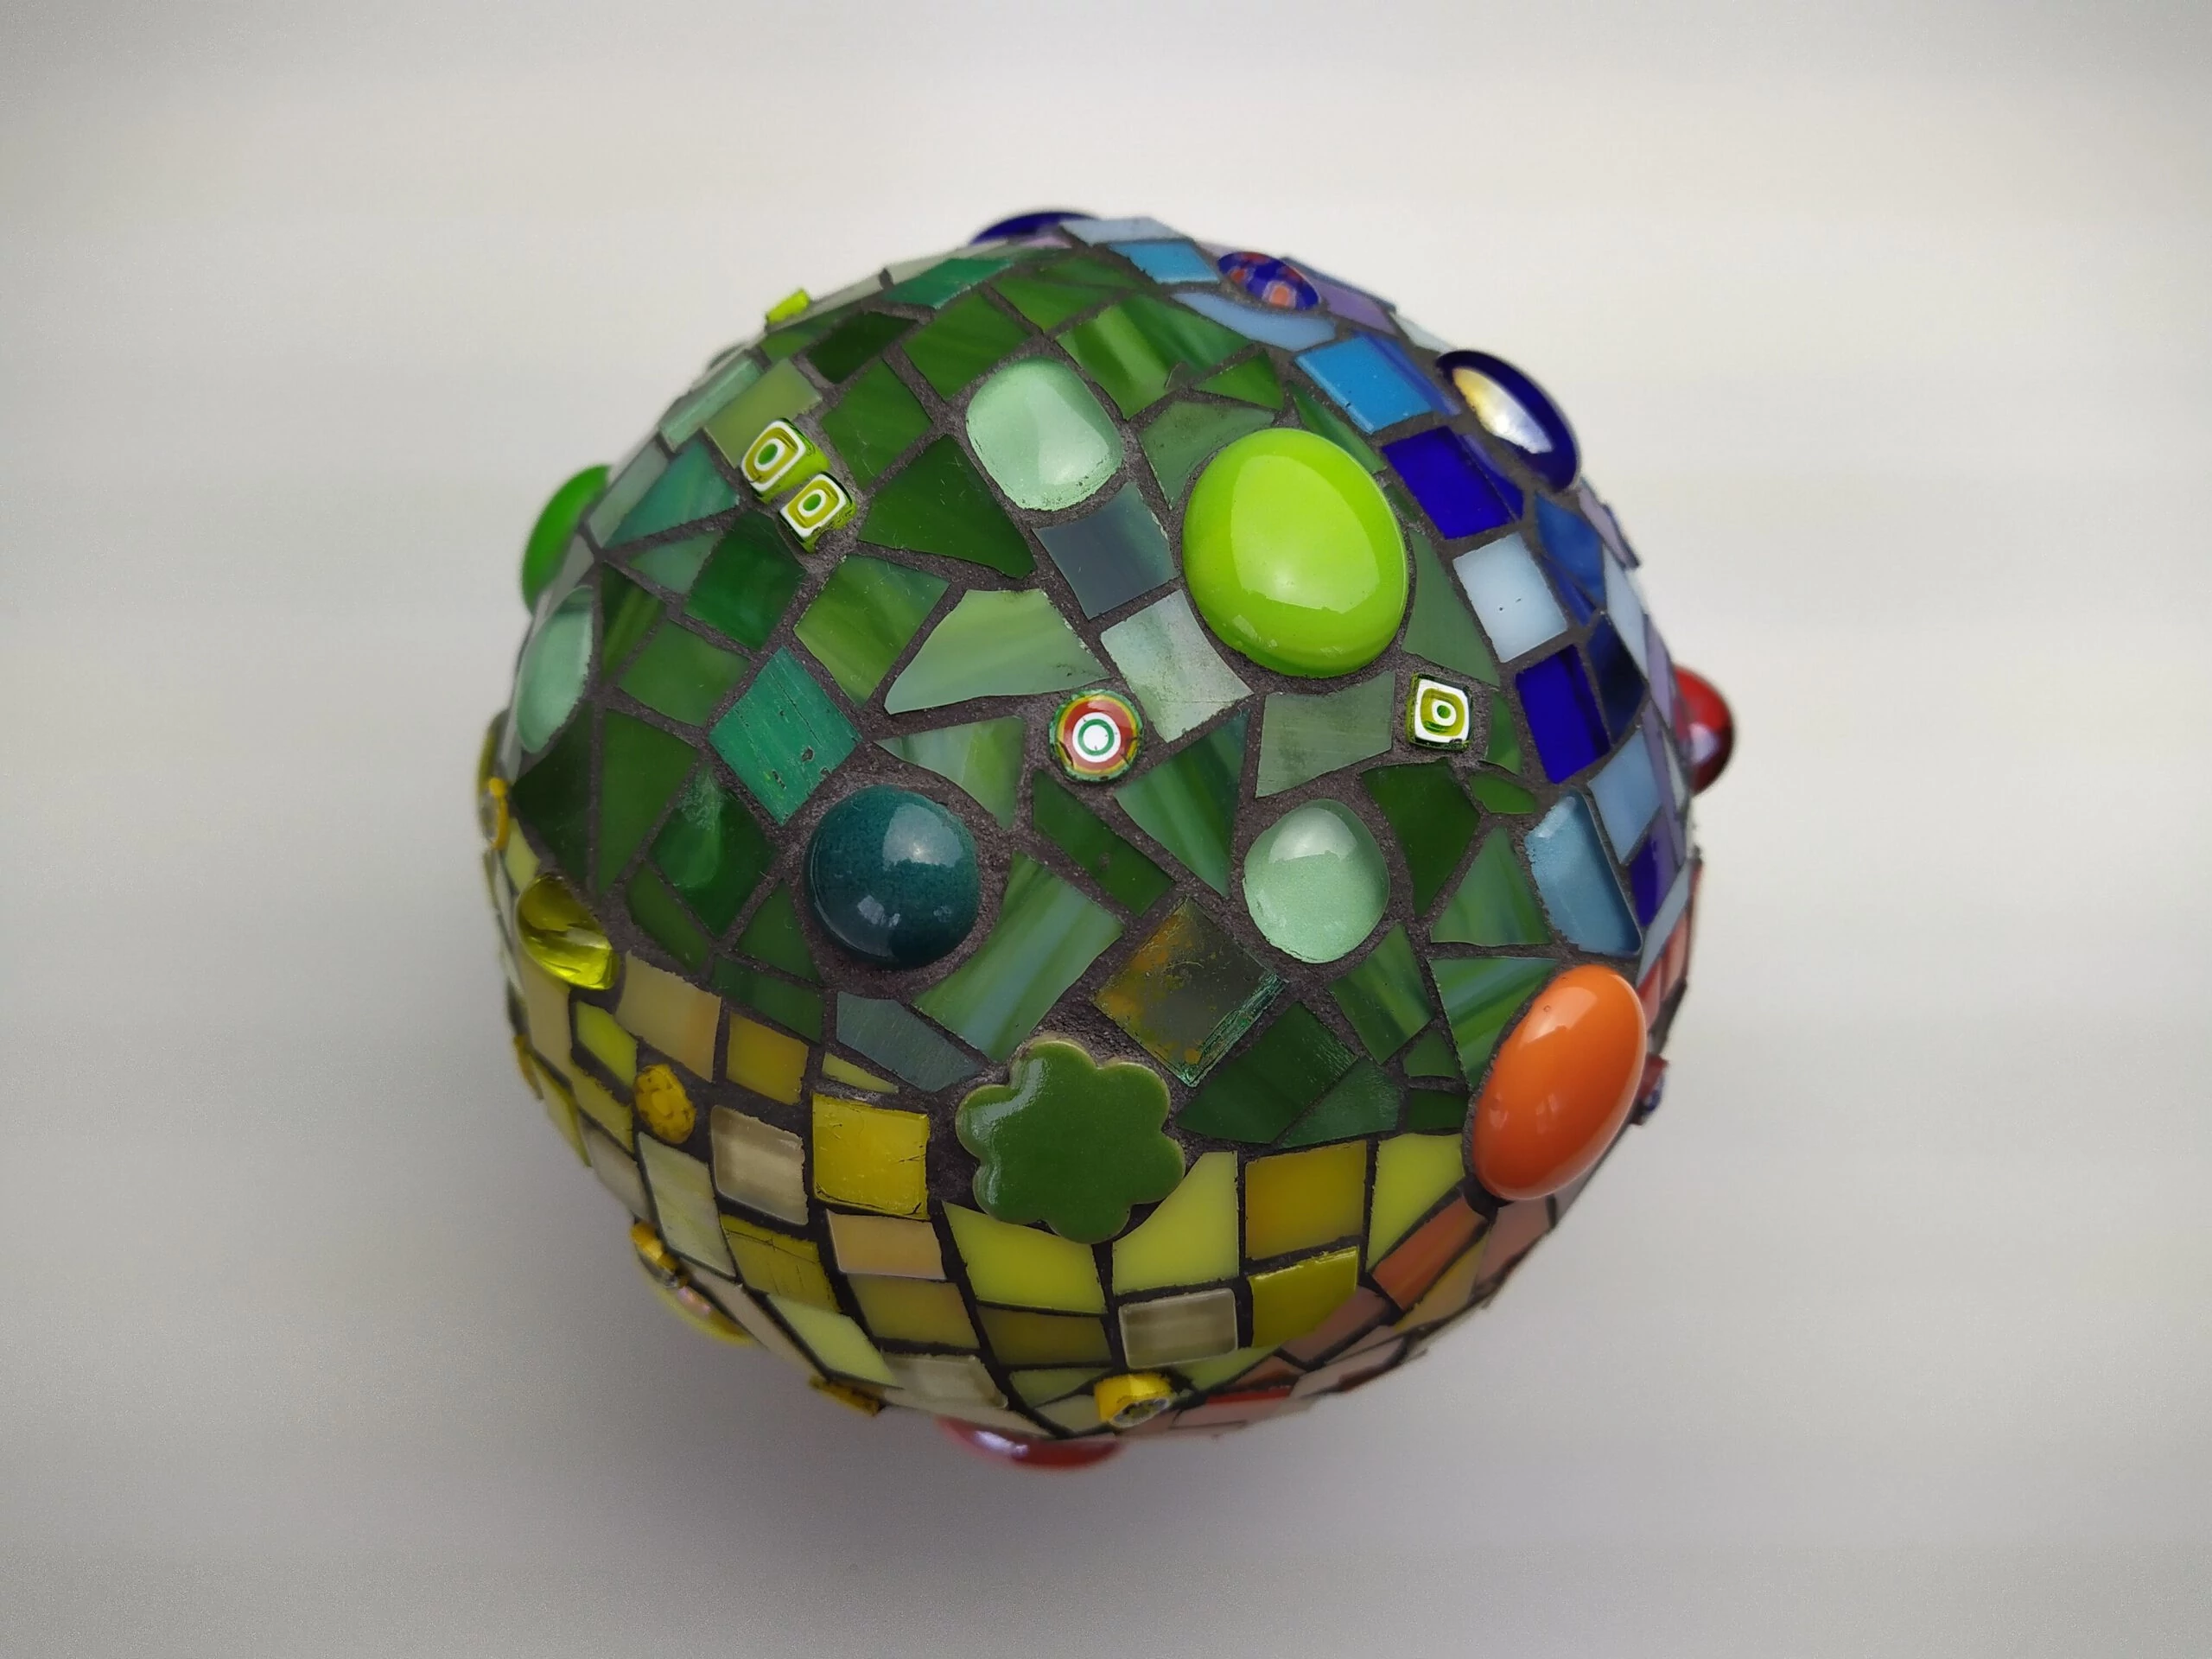 mosaic ball | "colorful" | by Steinfugenzeit